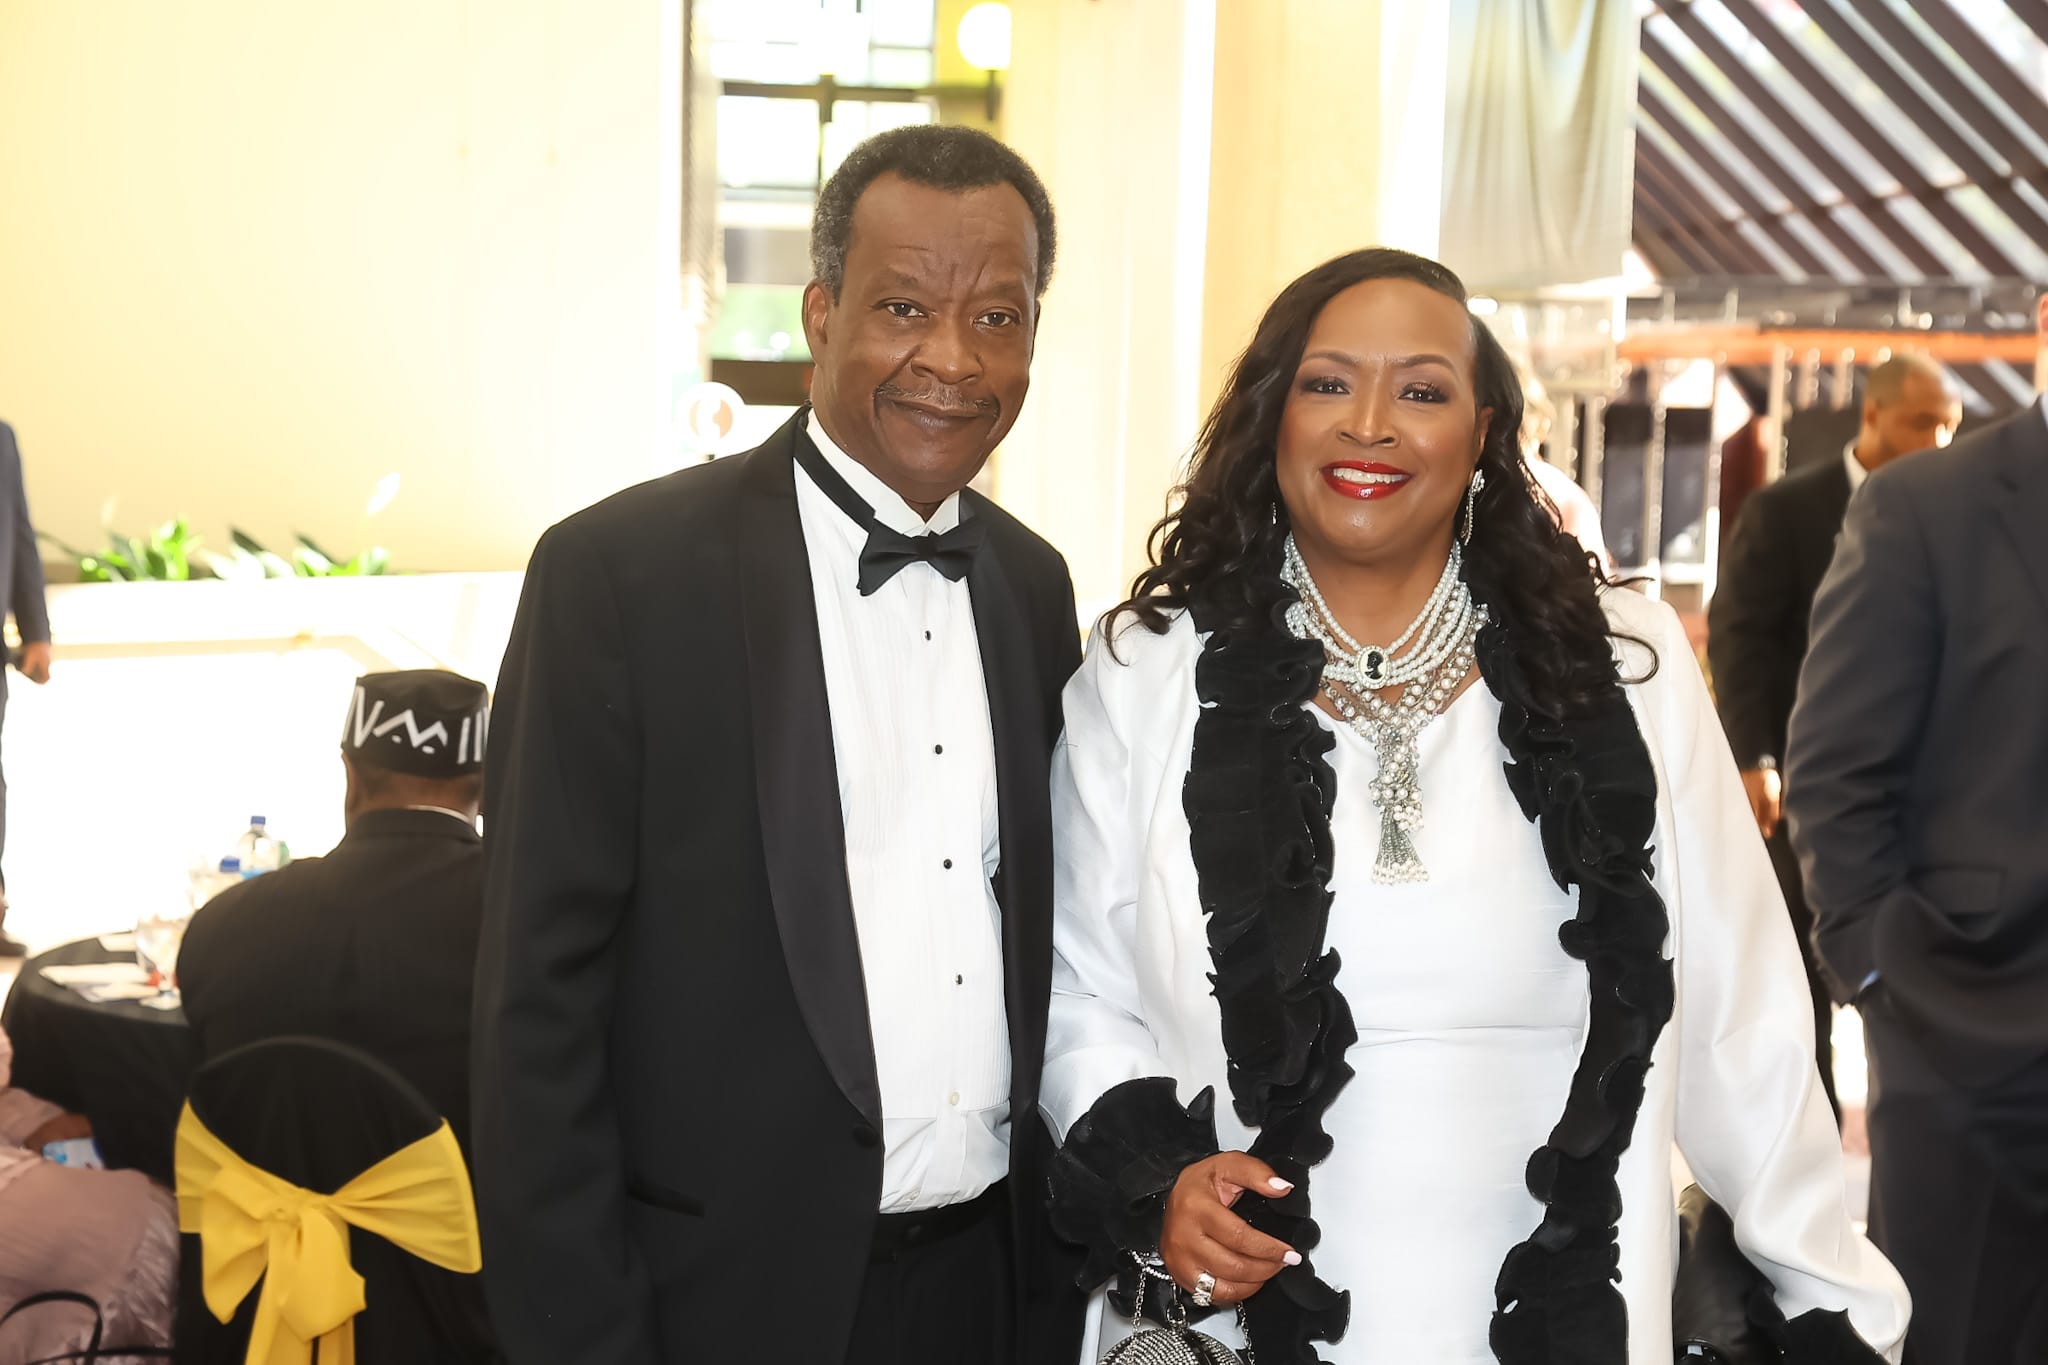 Drs. Willie Wilson and Cheryl Green